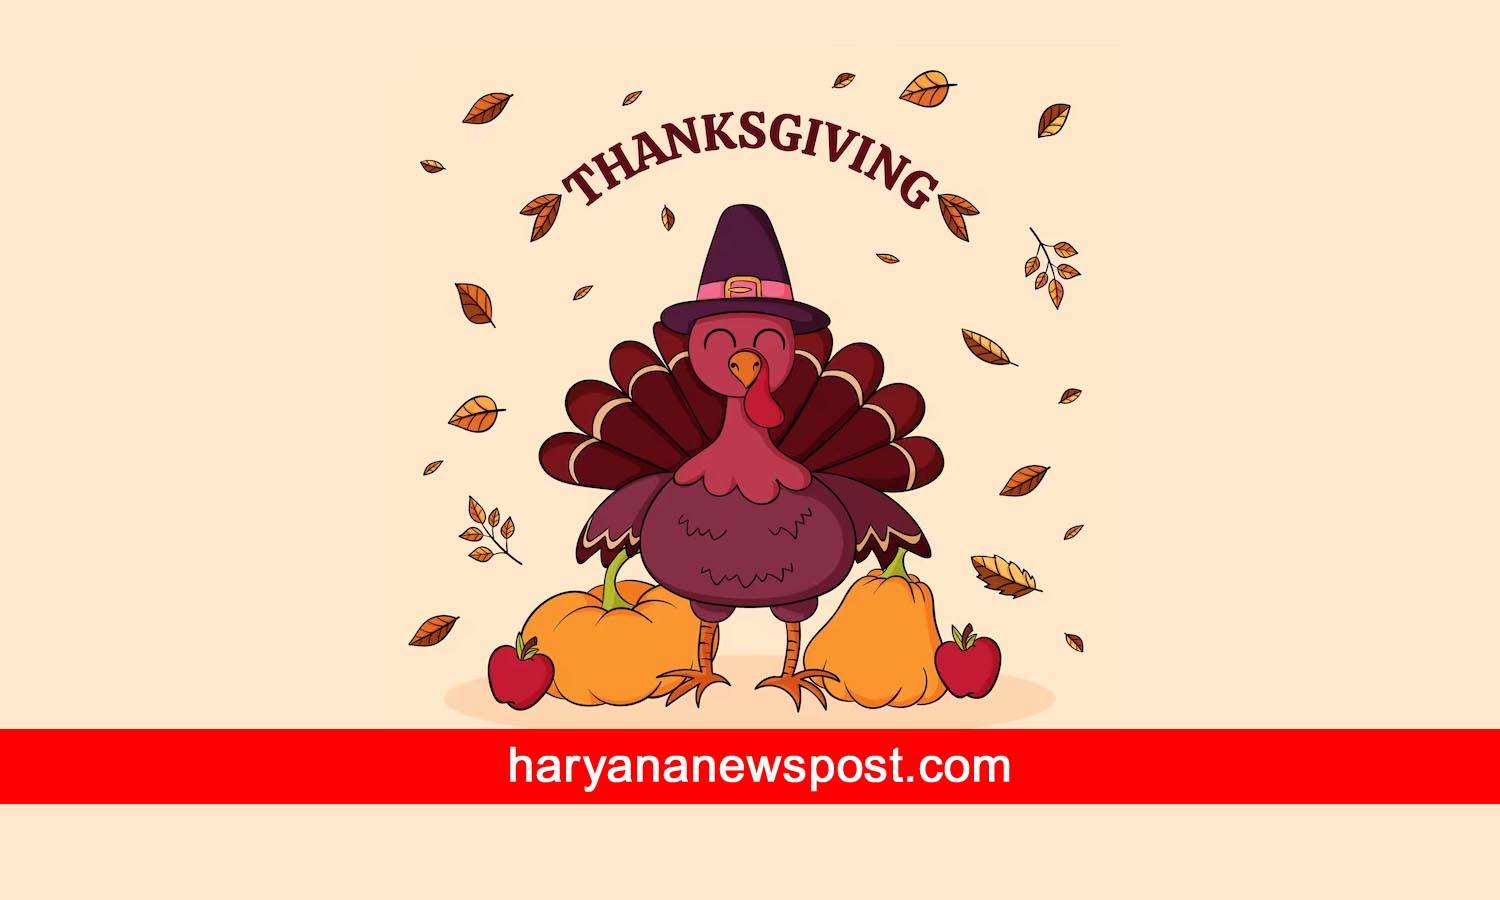 Religious Thanksgiving Messages, Christian Thanksgiving Quotes, Wishes